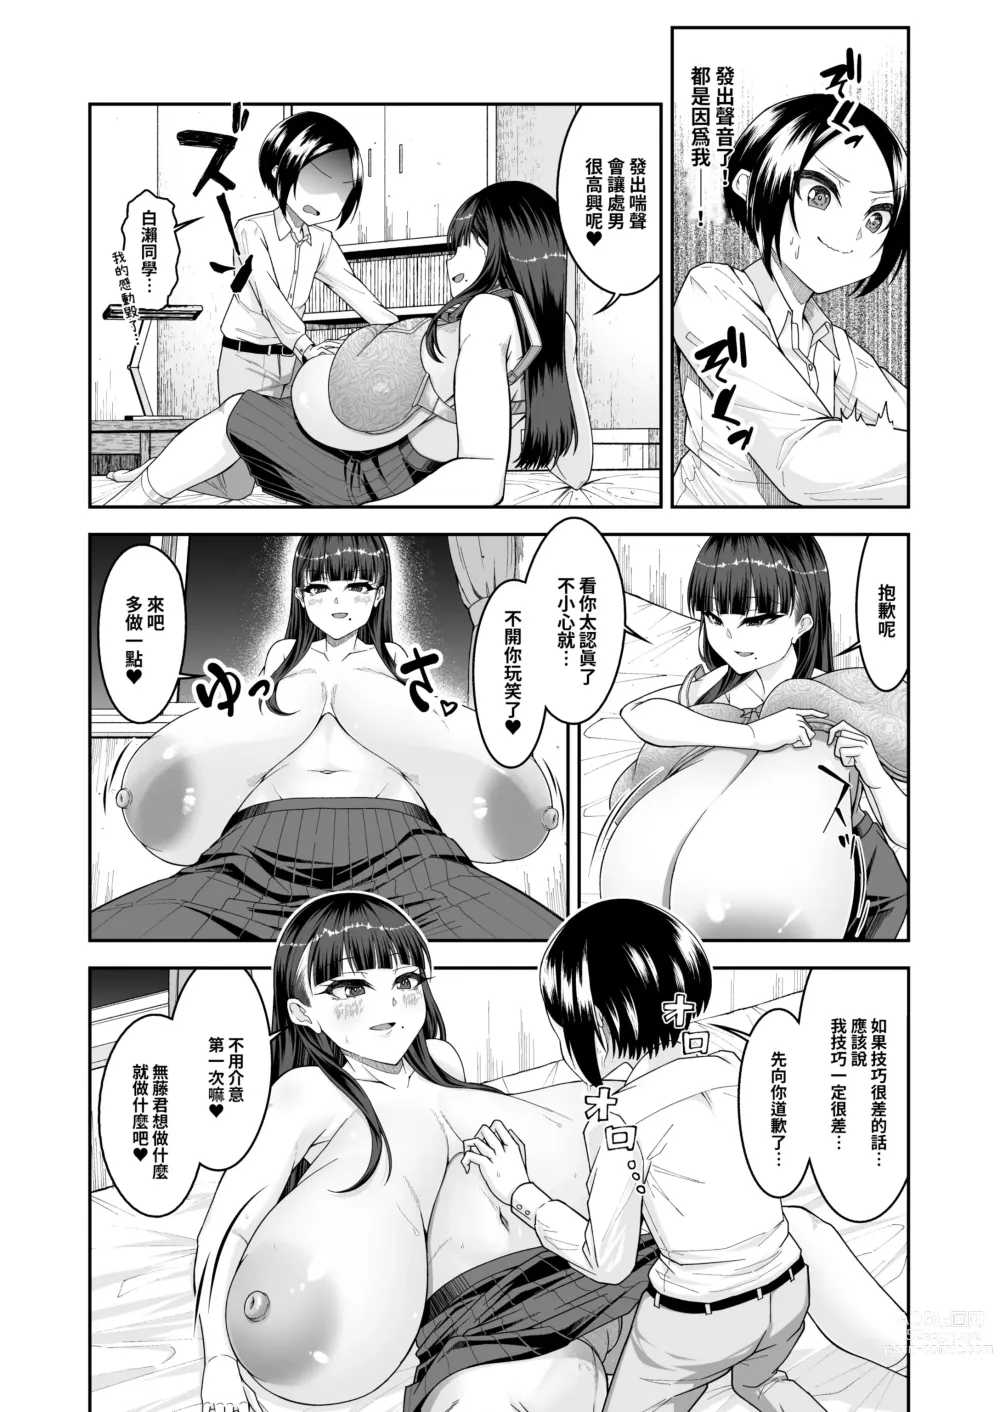 Page 12 of doujinshi 白肉的軟棉與黑肉的軟彈